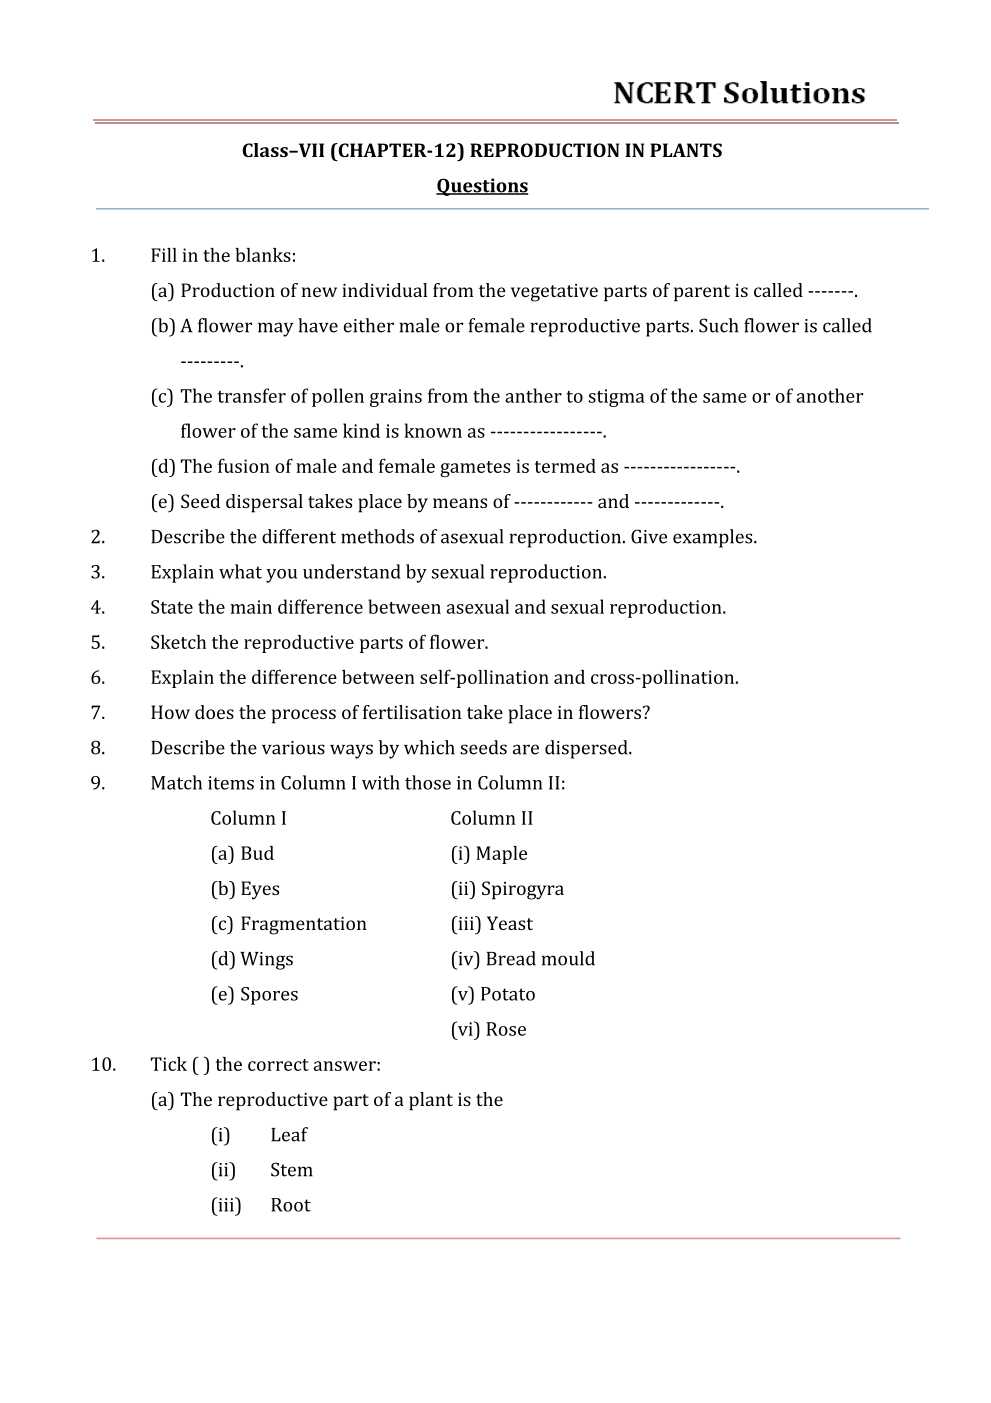 NCERT Solutions For Class 7 science Chapter 12 Reproduction in Plants